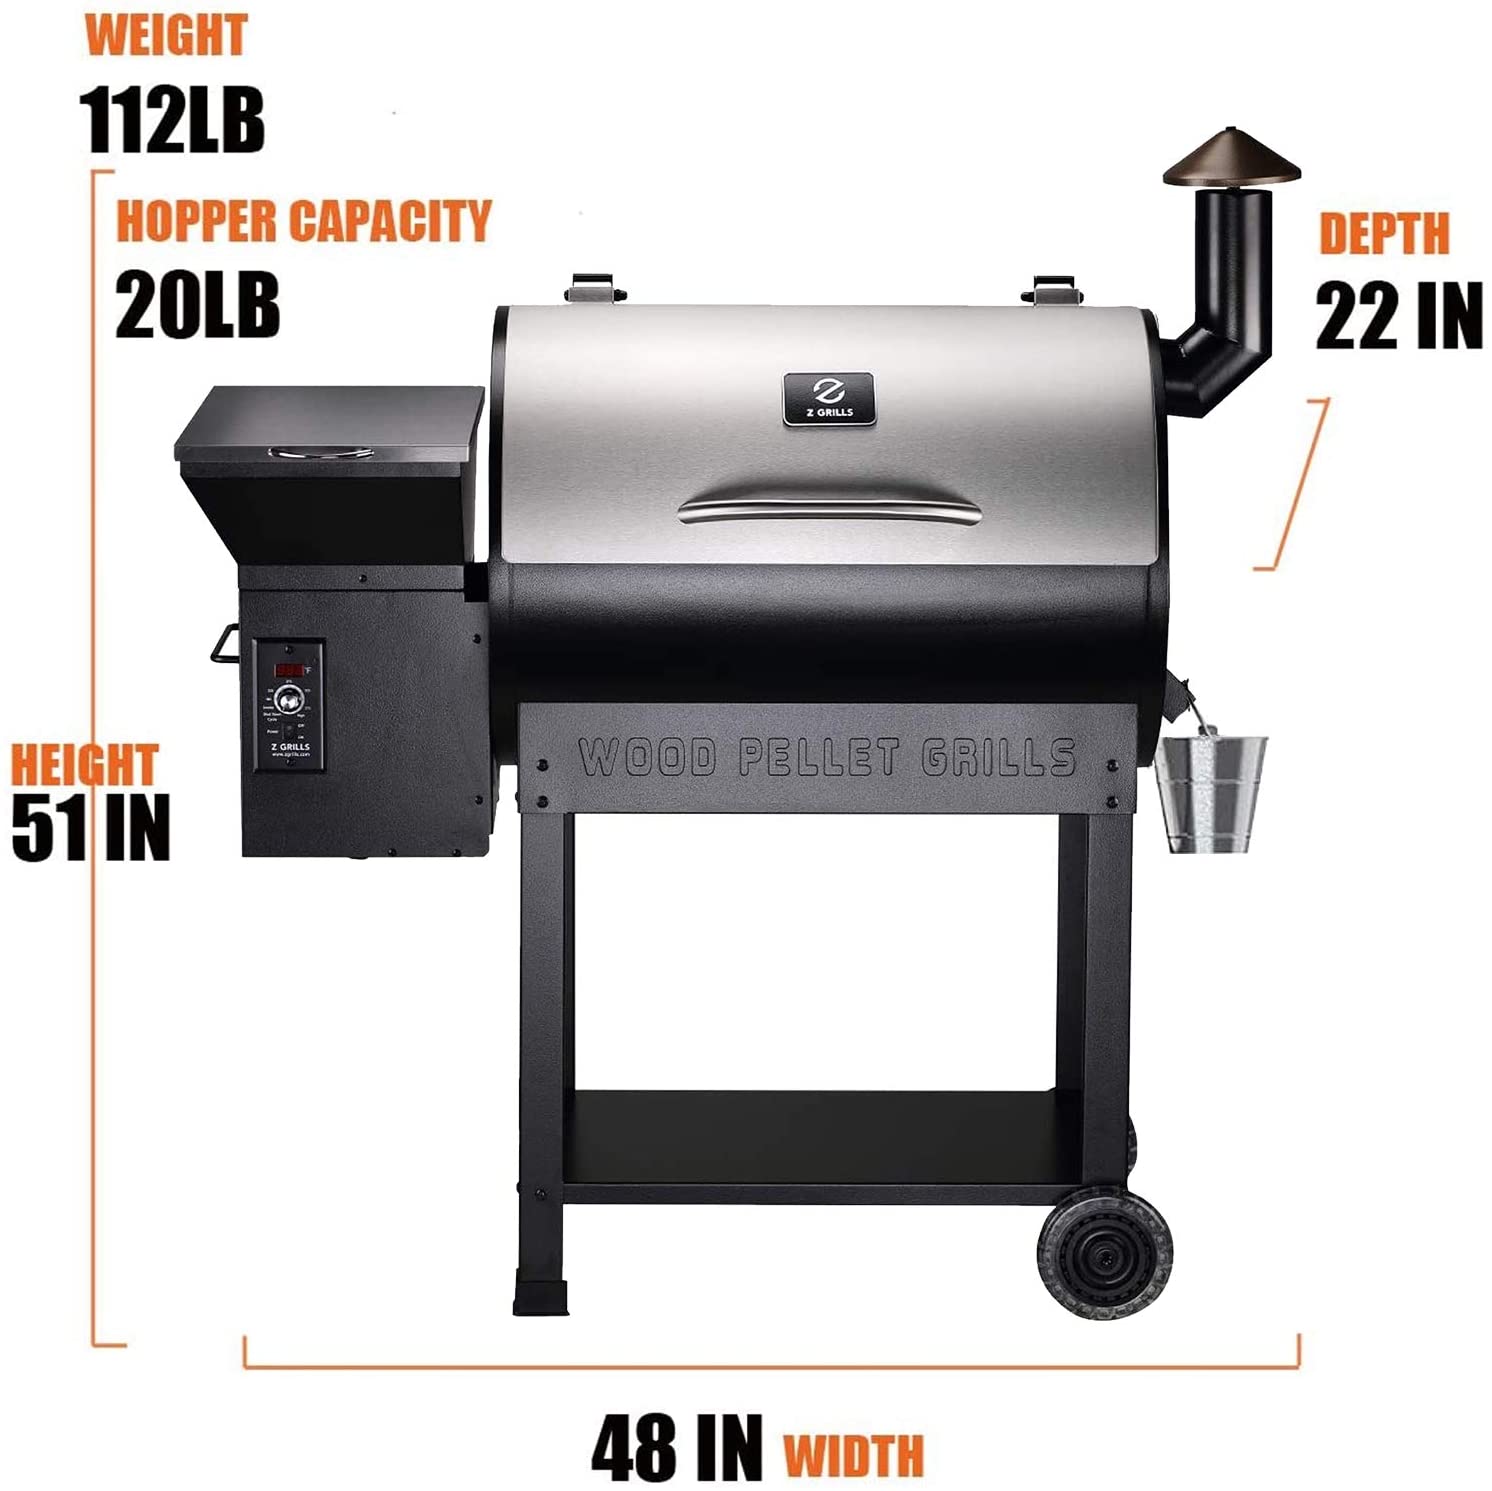 Z GRILLS 7002E Smart Wood Pellet Grill 8 in 1 Outdoor BBQ Smoker 700 SQ Inches Cooking Area Barbecue Grill Stainless and Black - image 4 of 8